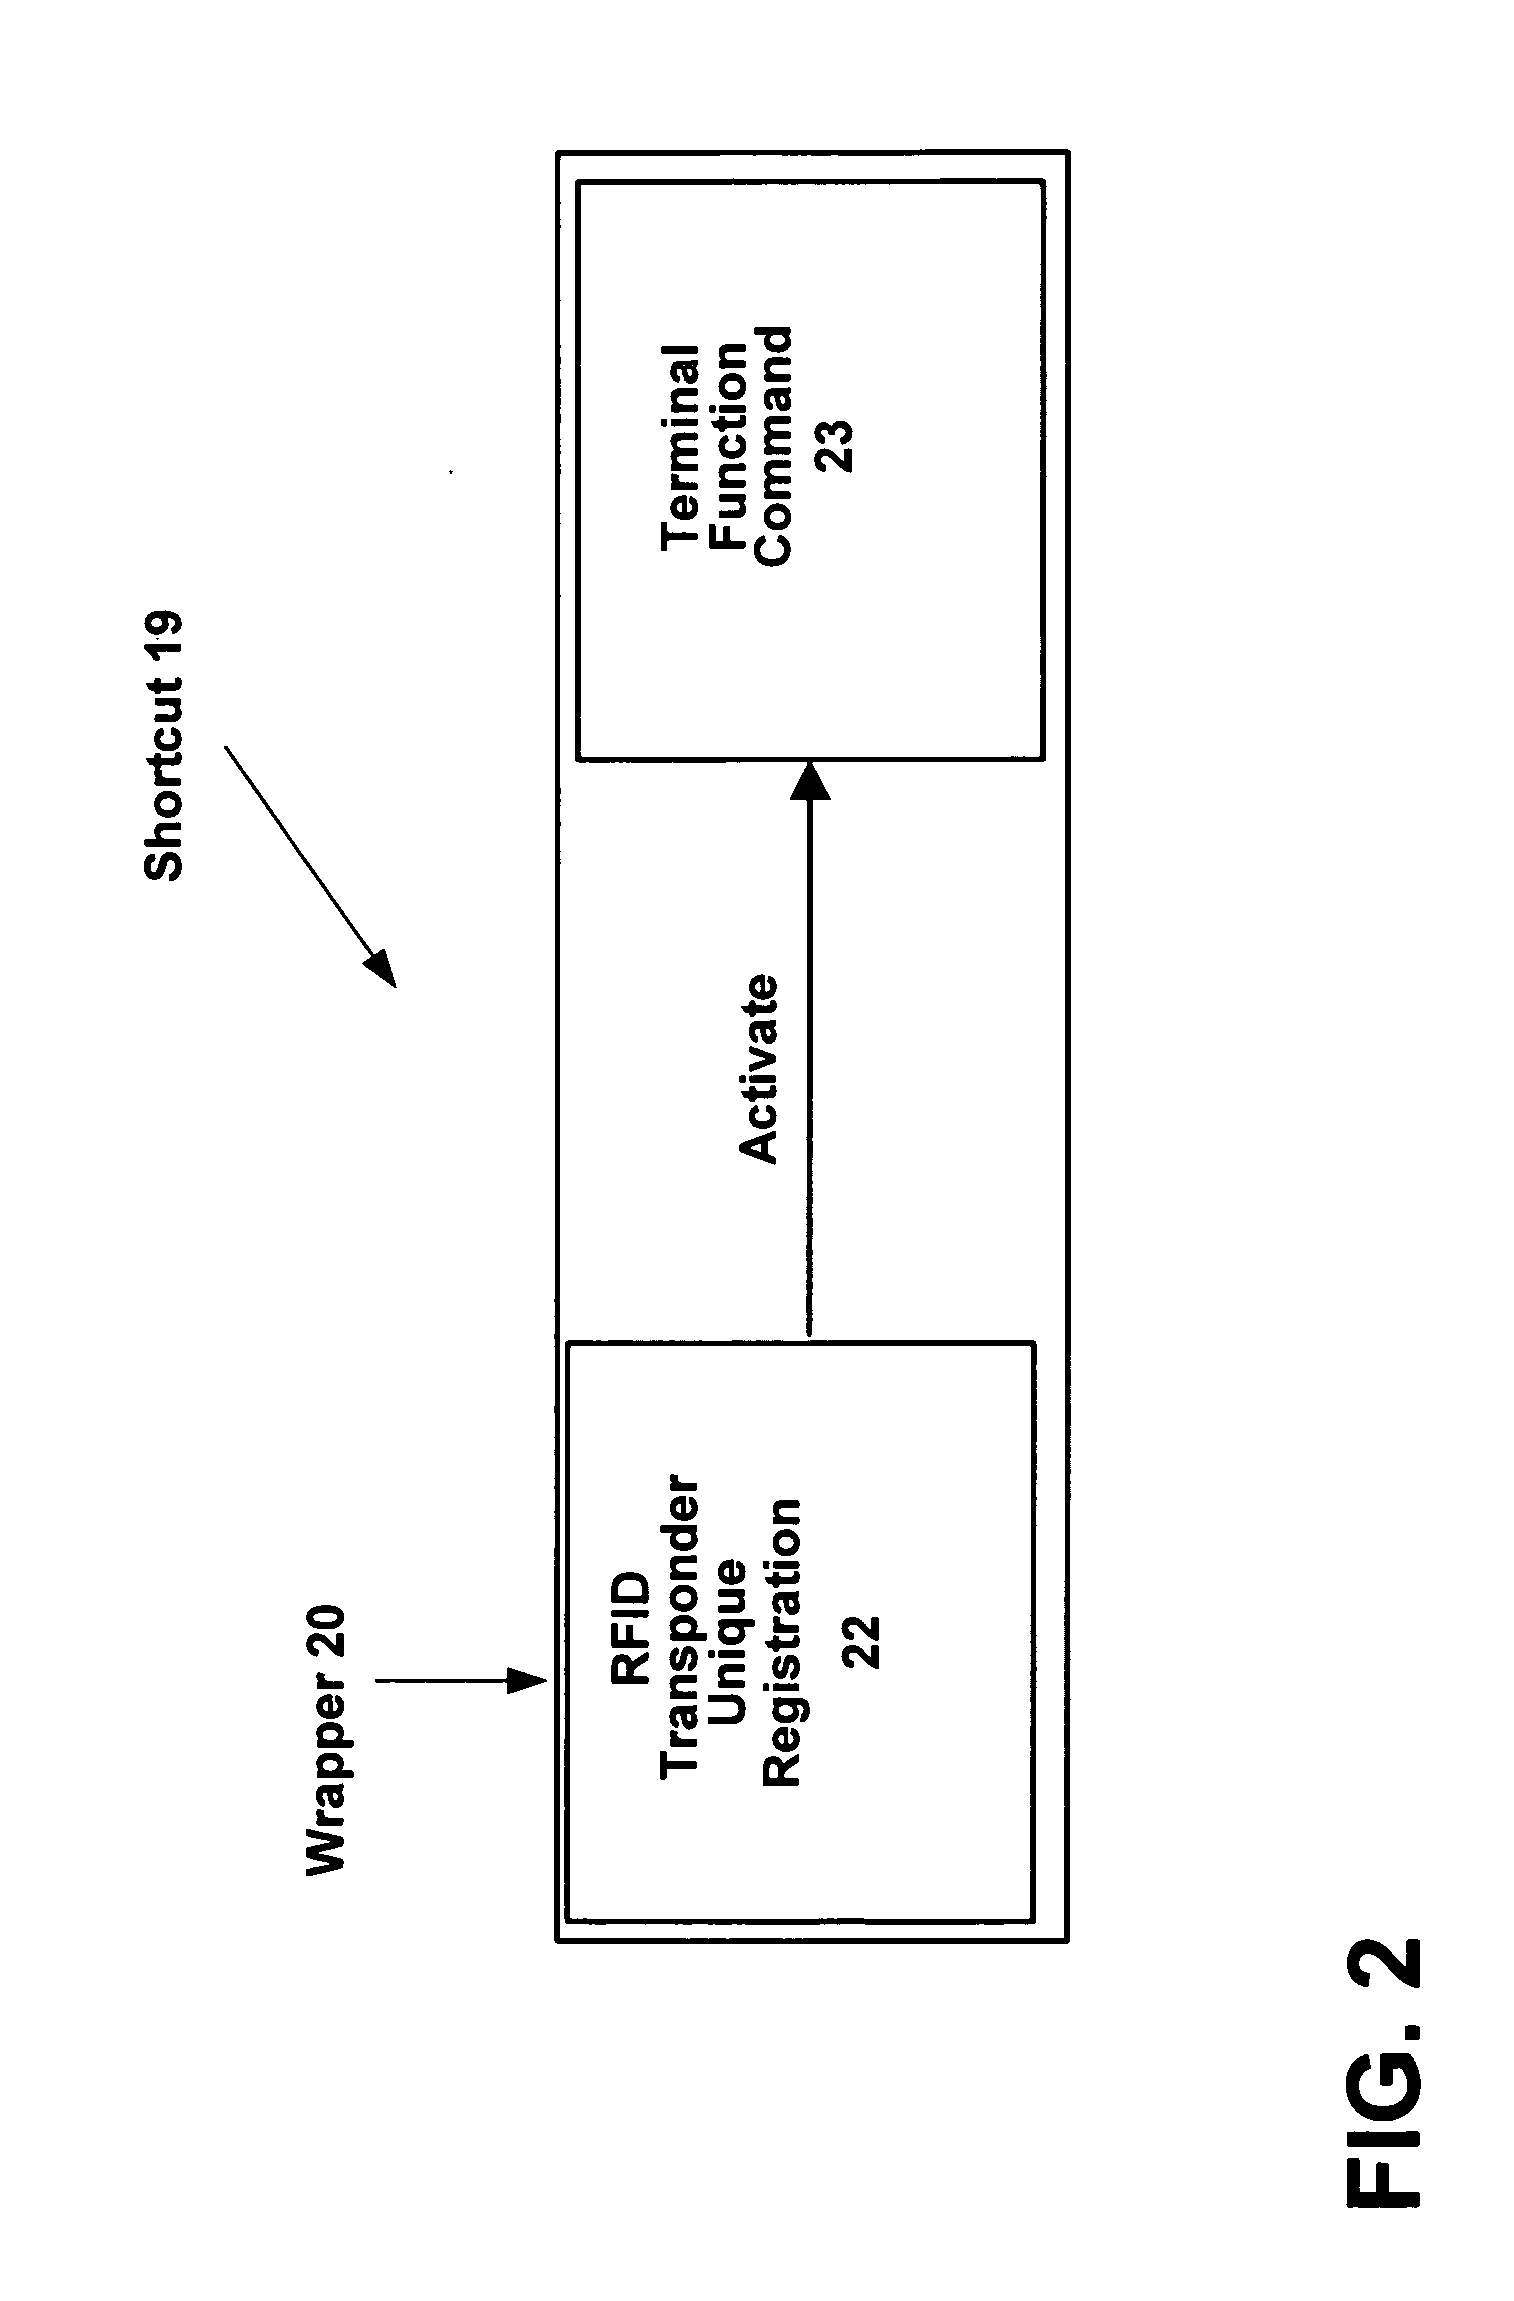 Apparatus, system, method and computer program product for creating shortcuts to functions in a personal communication device